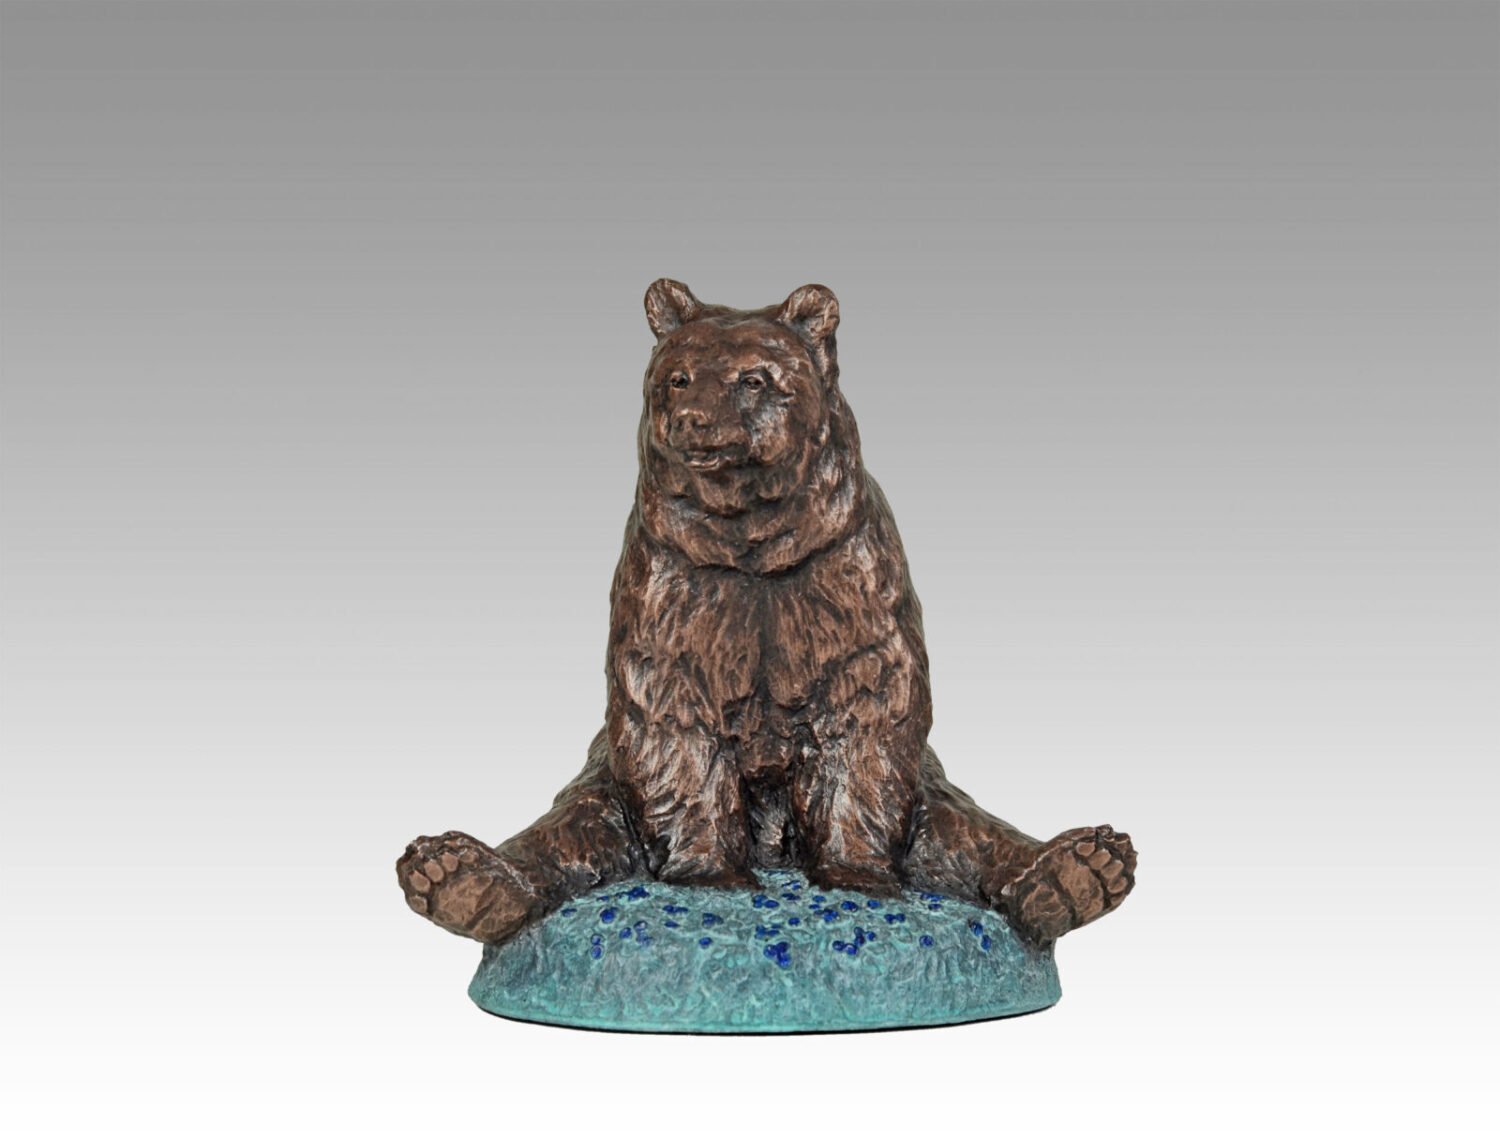 Gallery, Bask in the Berries, $325 CAD, Metal Infused, 7 ¾” H x 8" W, Edition 60, Specialty Finish, Wildlife Sculpture of a bear sitting in a blueberry patch, Sculptor Tyler Fauvelle